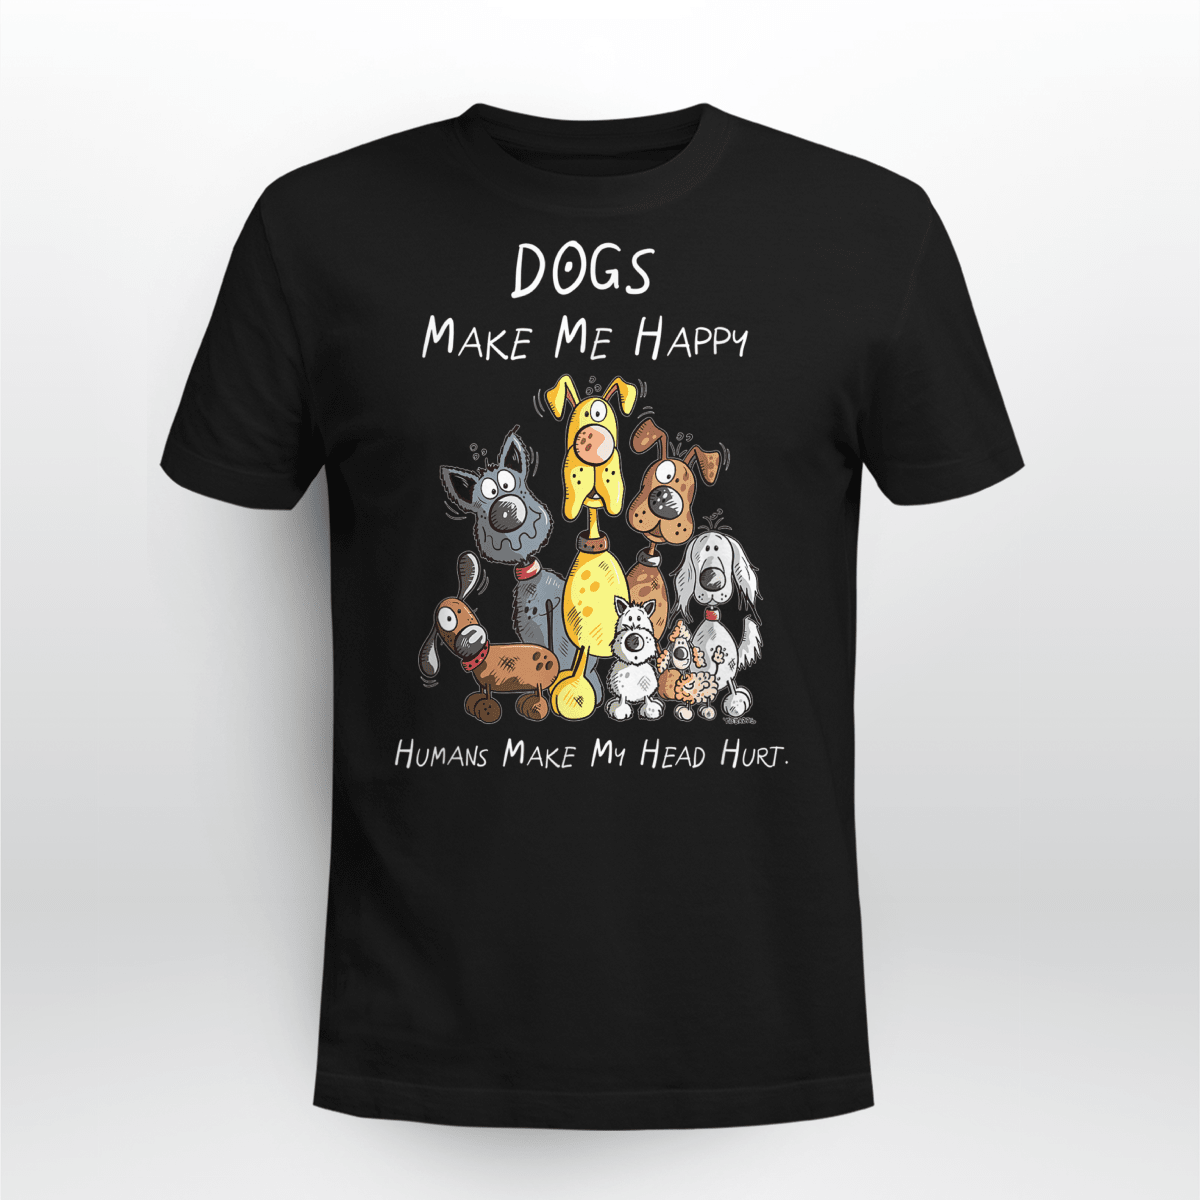 THIS IS A DISCOUNT FOR YOU  :“Dogs Make Me Happy”Charity T-shirt